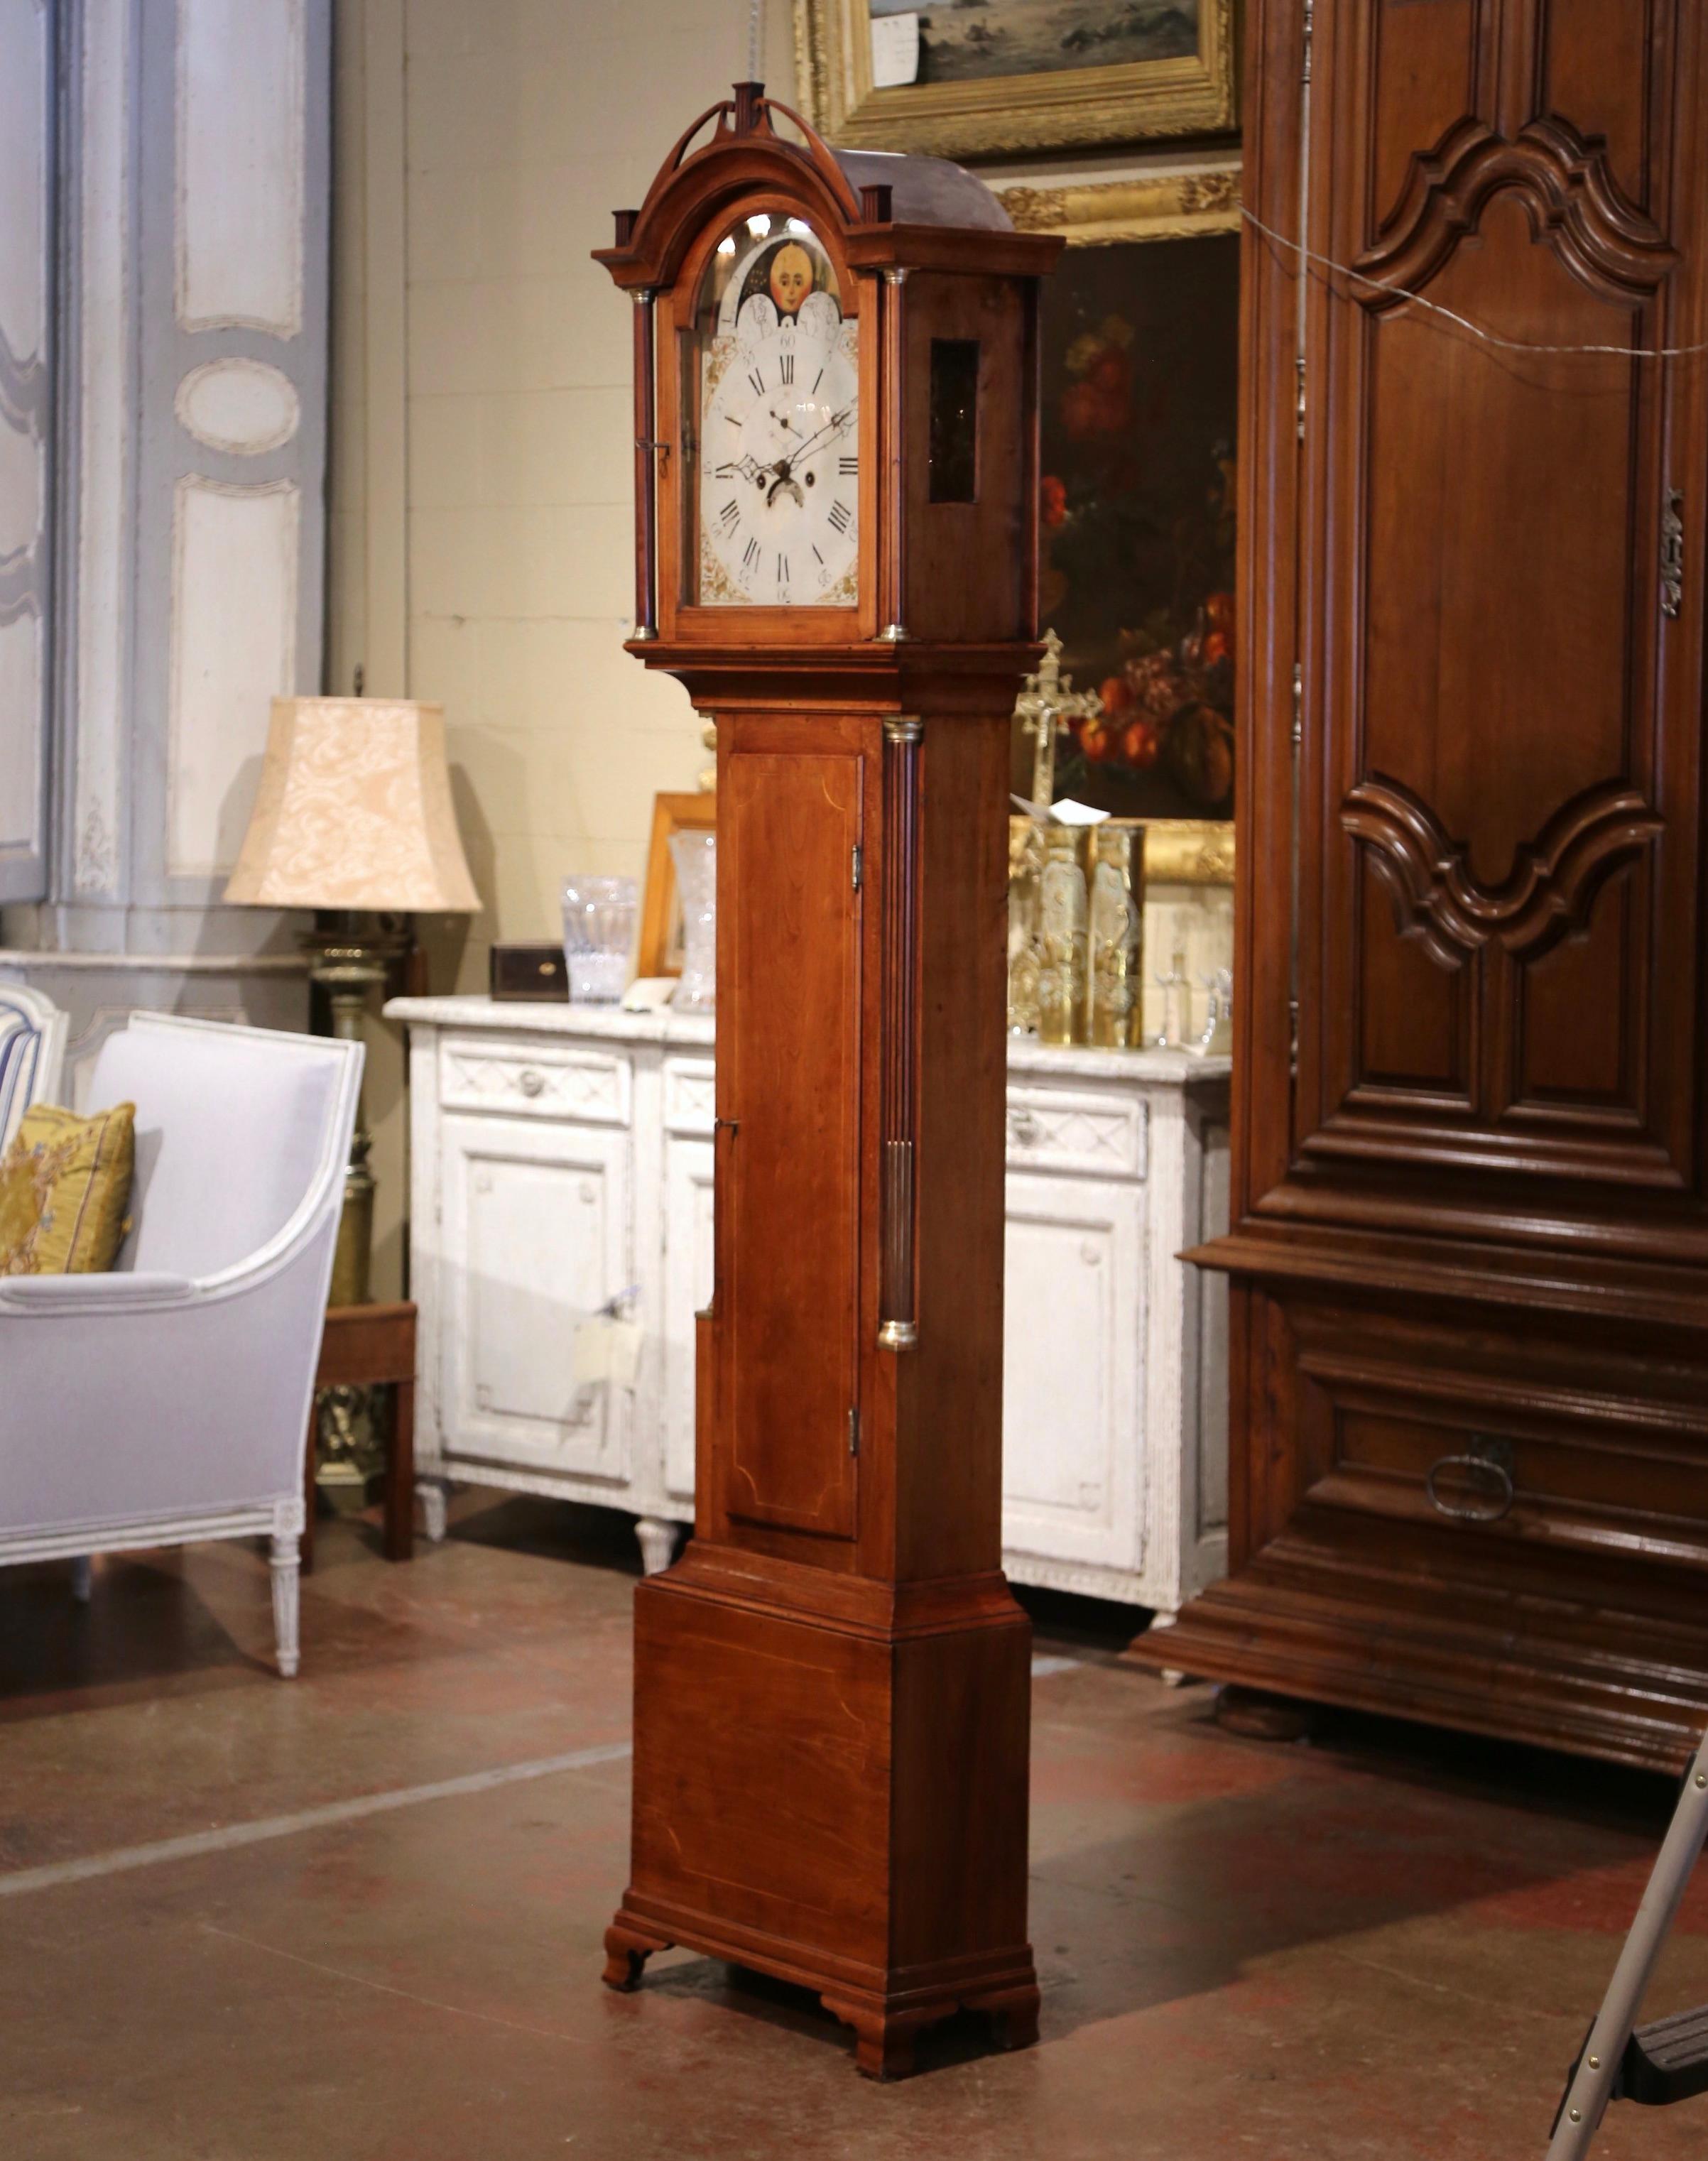 This elegant, antique Chippendale grandfather clock was carved in England, circa 1780. The tall case clock with bonnet top is decorated with side columns embellished with brass mounts. The clock movement is original with pendulum, weighs and key.